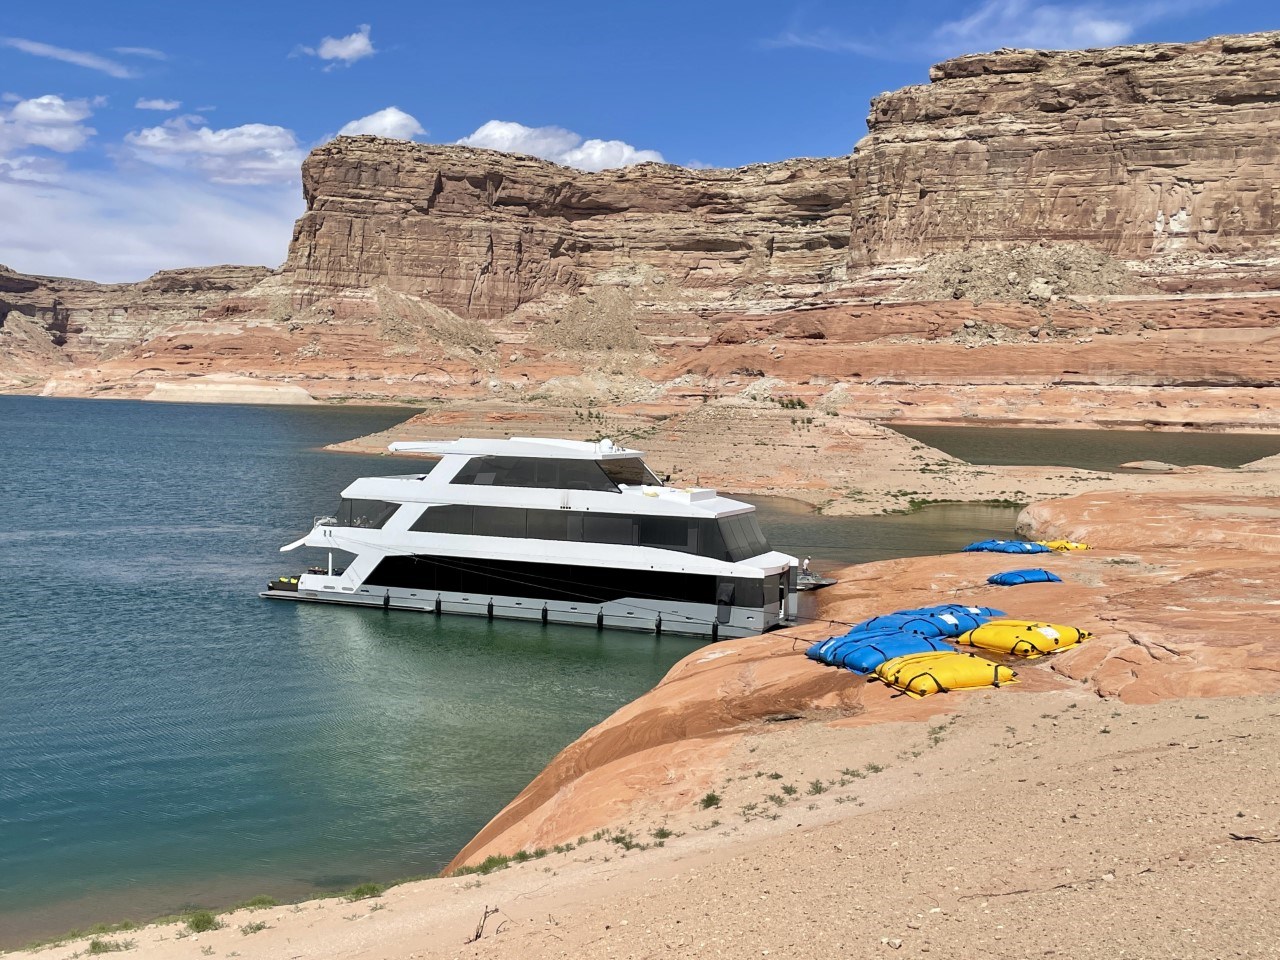 Multiple large yellow and blue bags full of water sit flat on sandstone rock ledge beach. They are tethered with ropes to a large houseboat floating on the water close by. The area is surrounded by a large canyon wall.